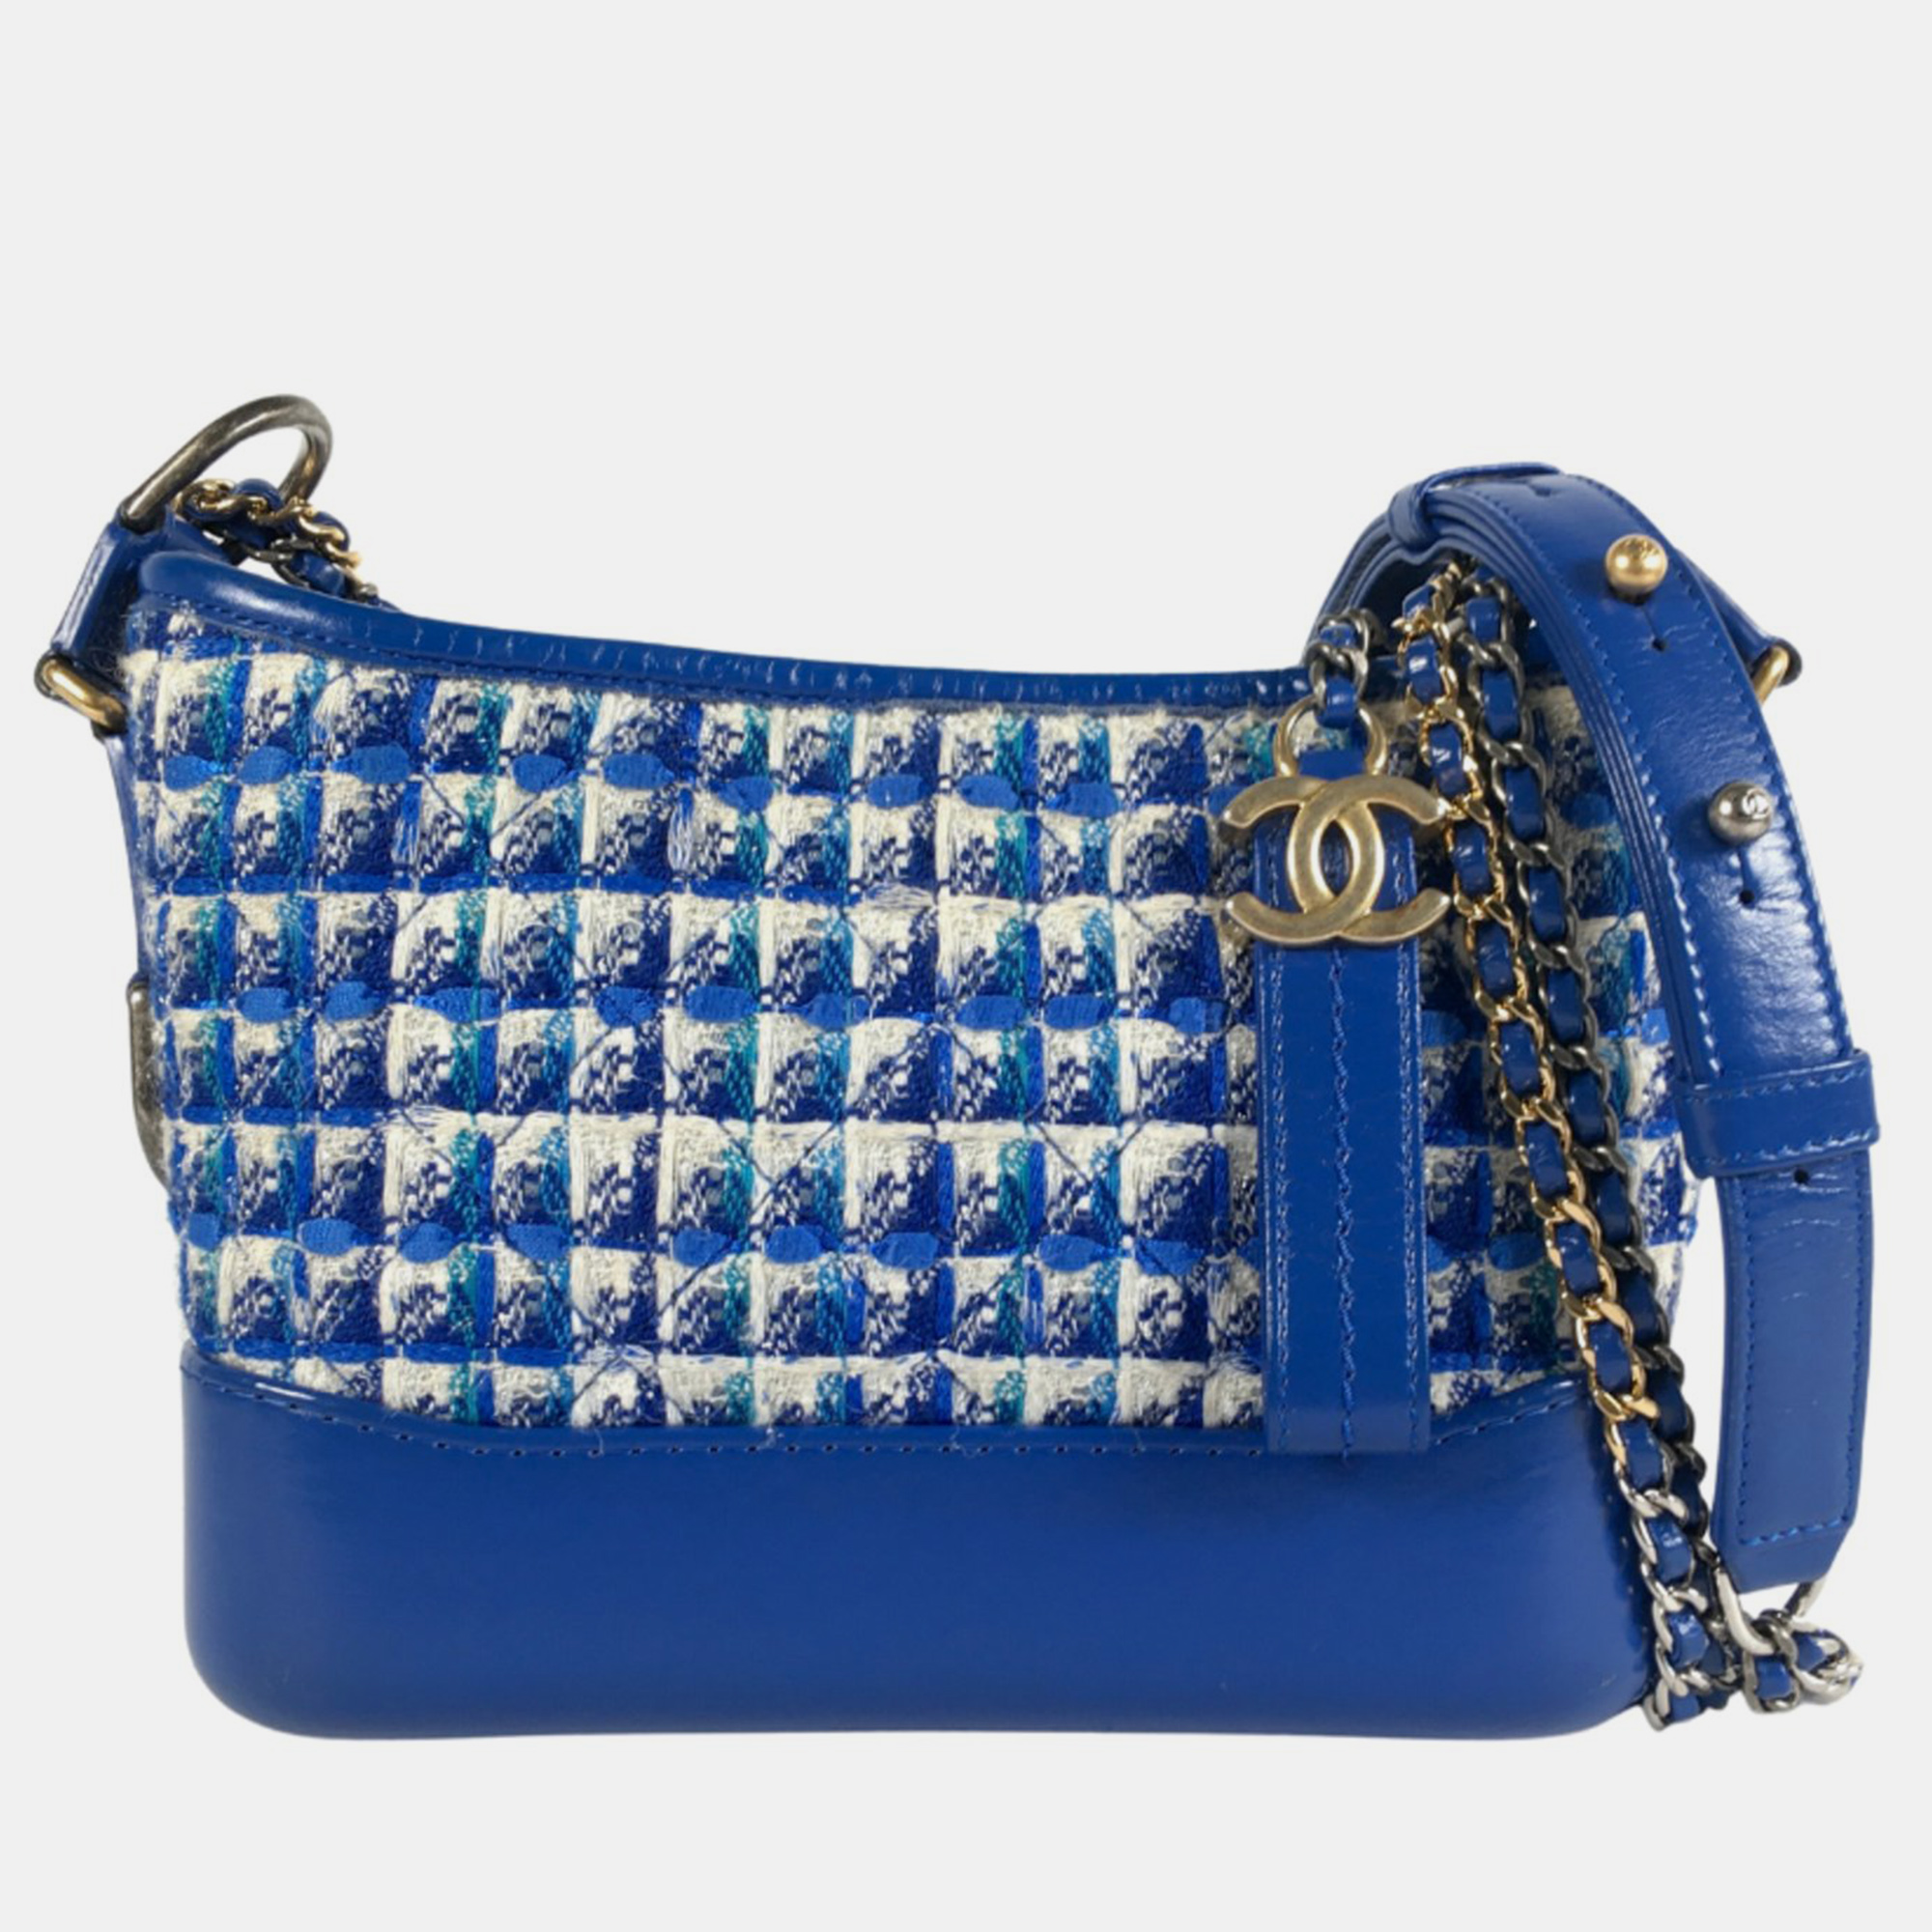 Chanel blue tweed and leather small gabrielle shoulder bag